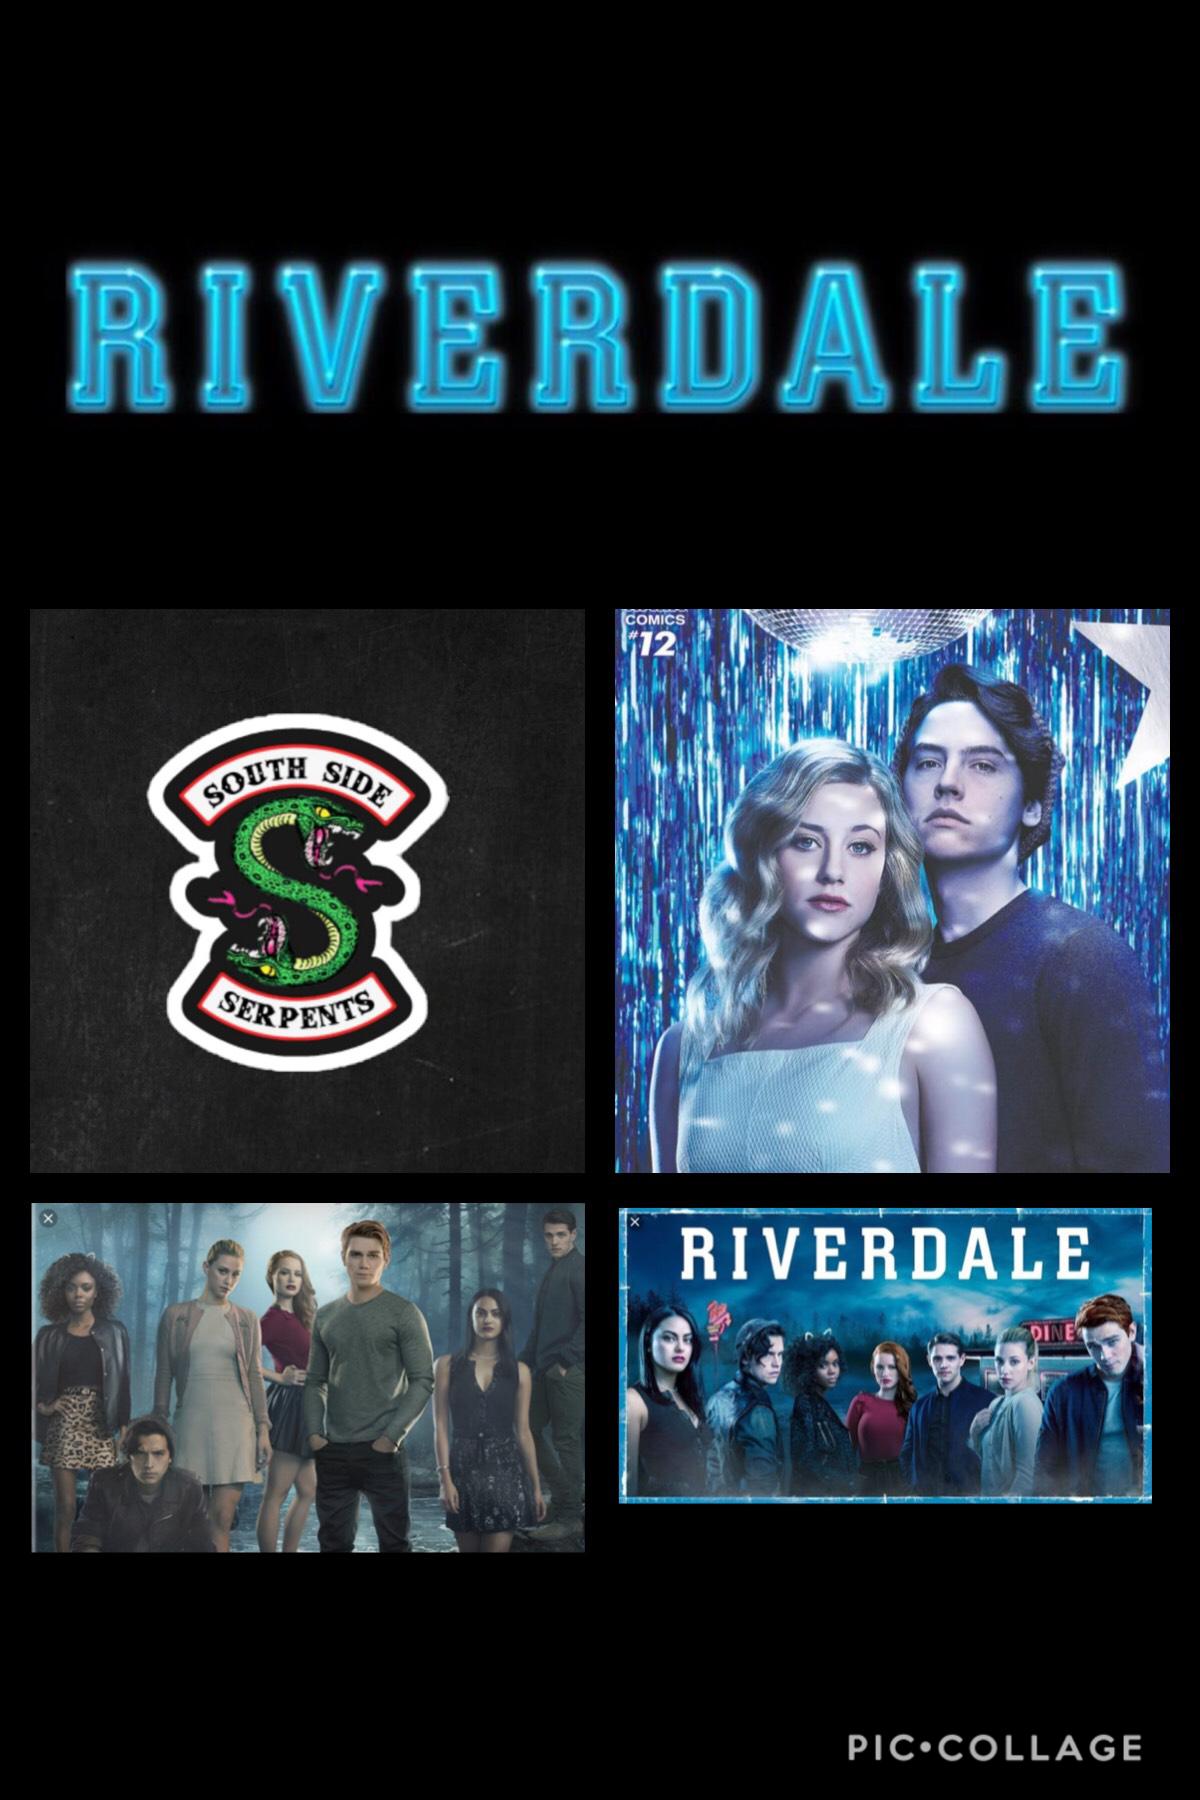 Riverdale next show—->The Chilling Adventures of Sabrina❤️❤️🖤🖤